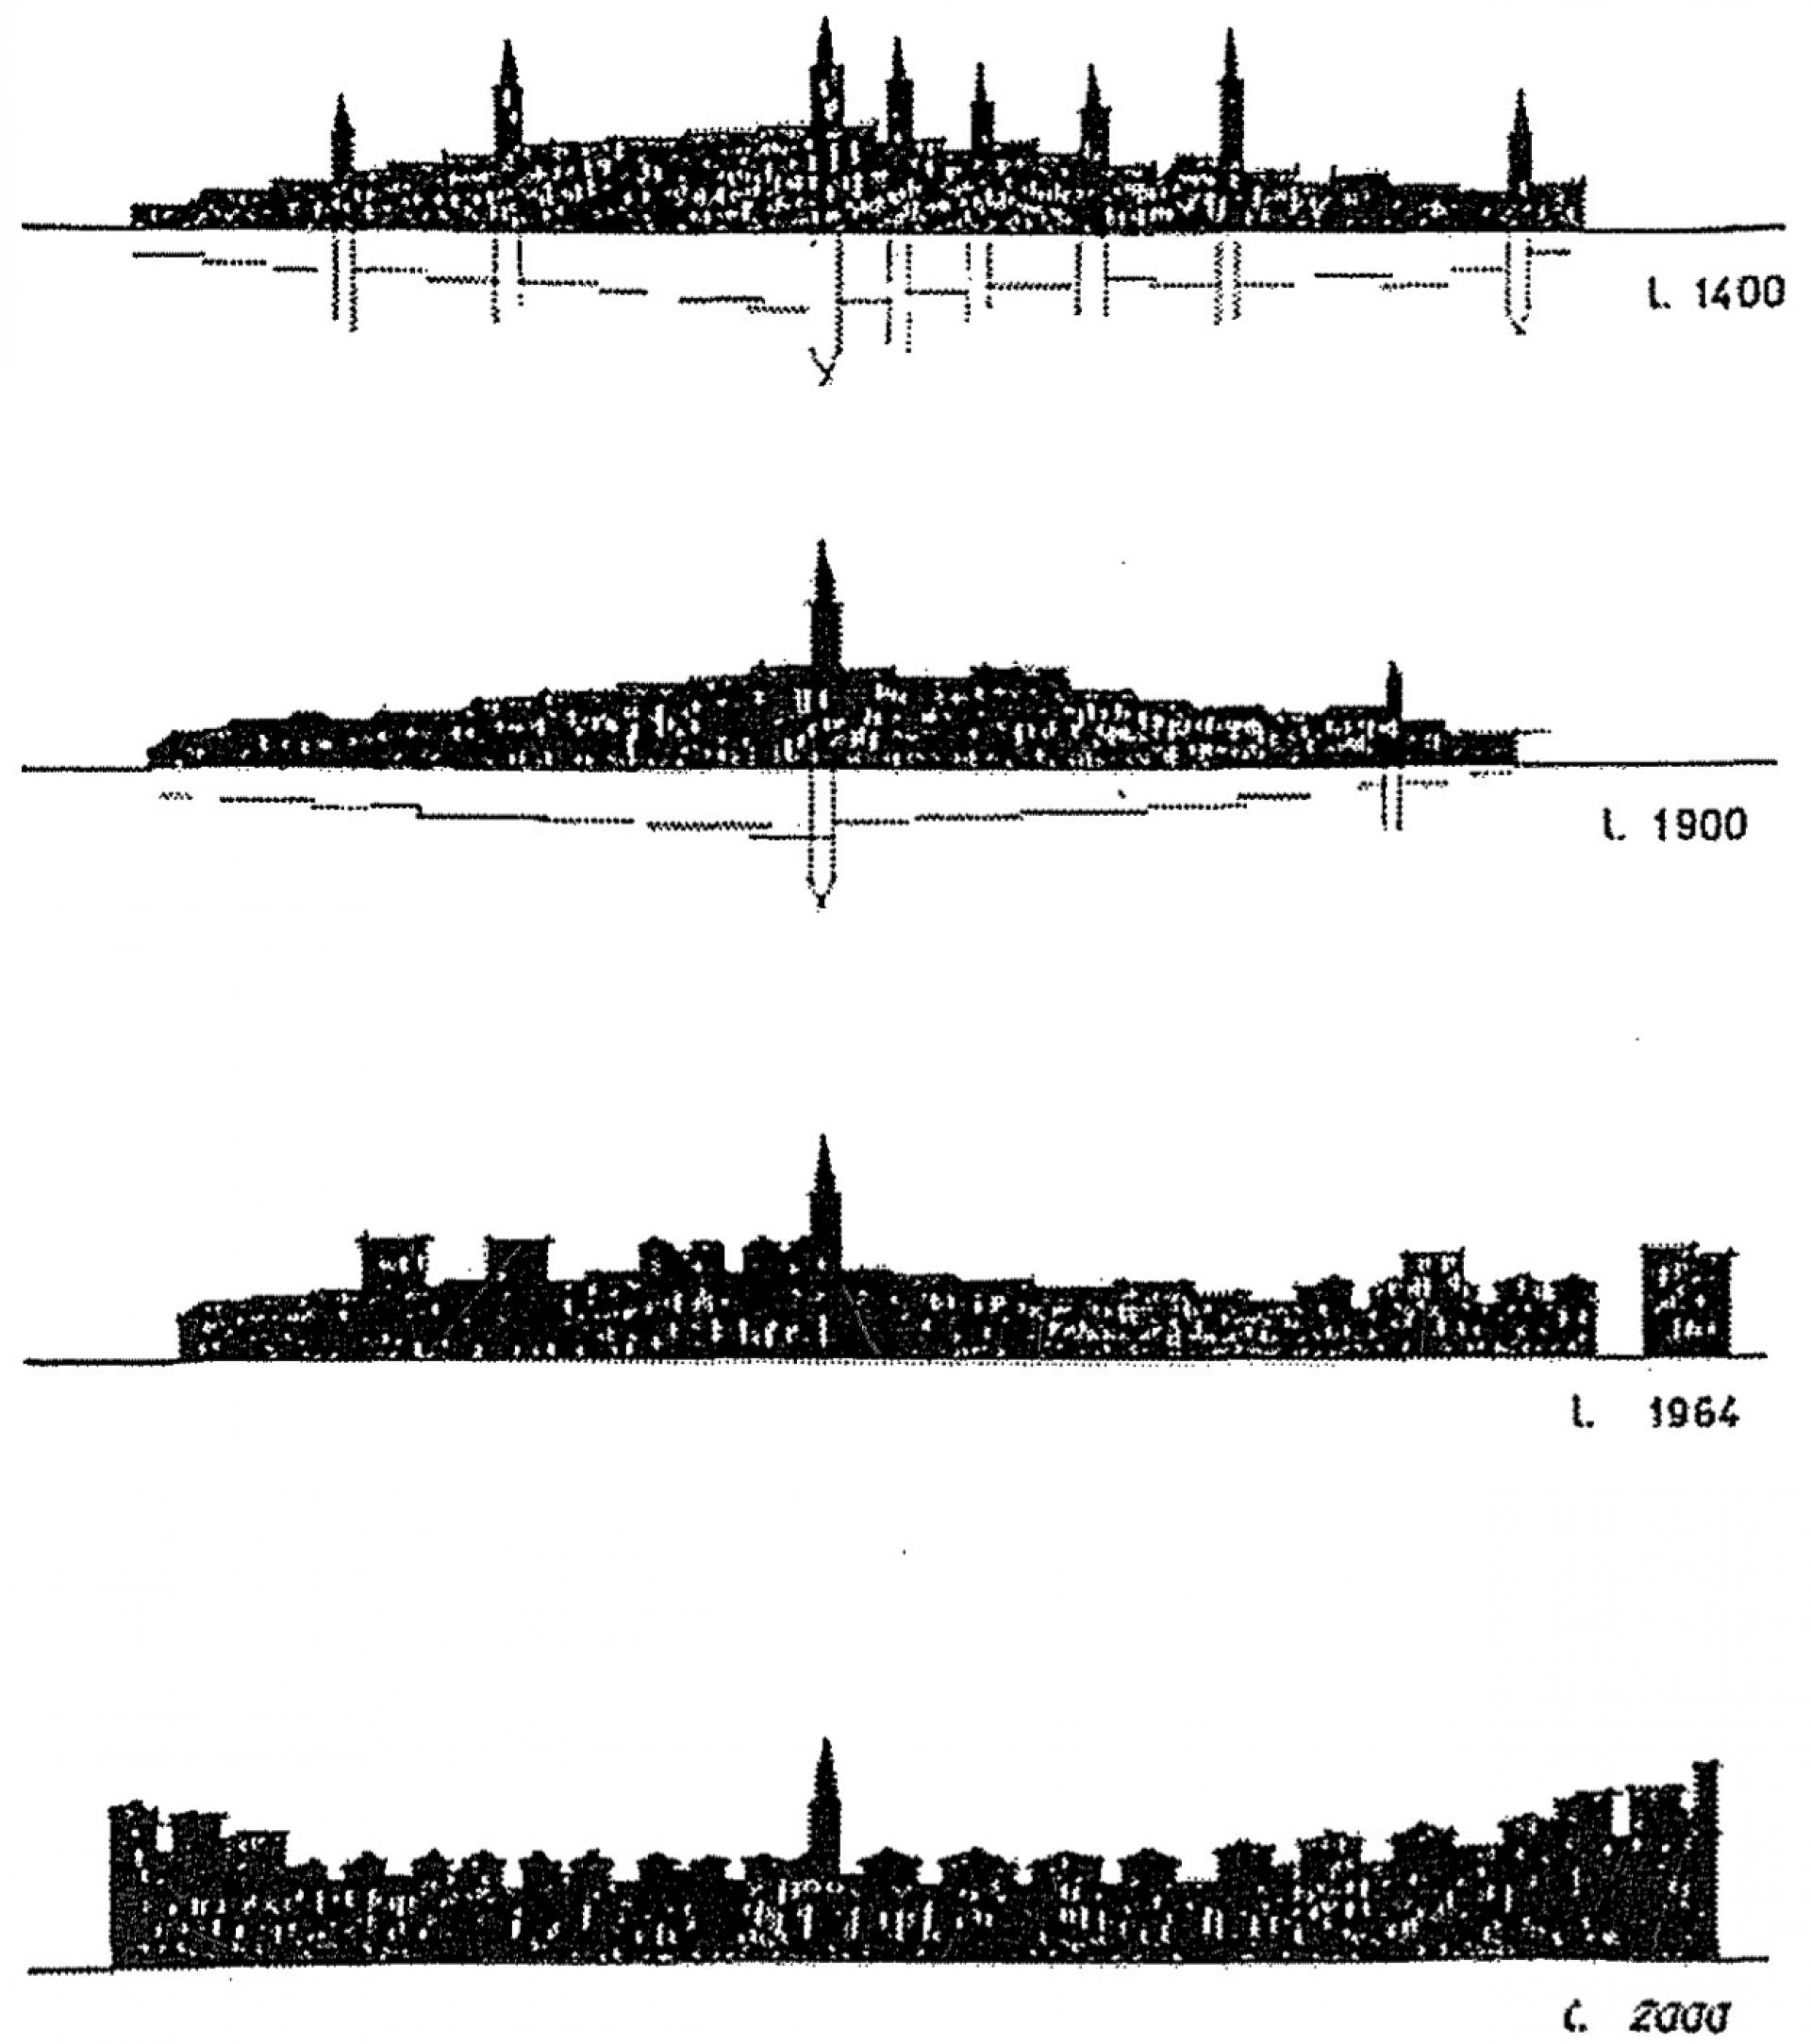 The development of the silhouette of the Koper’s city centre, where the ideologically conditioned plan of building new city walls consisting of skyscrapers, was never fully implemented.